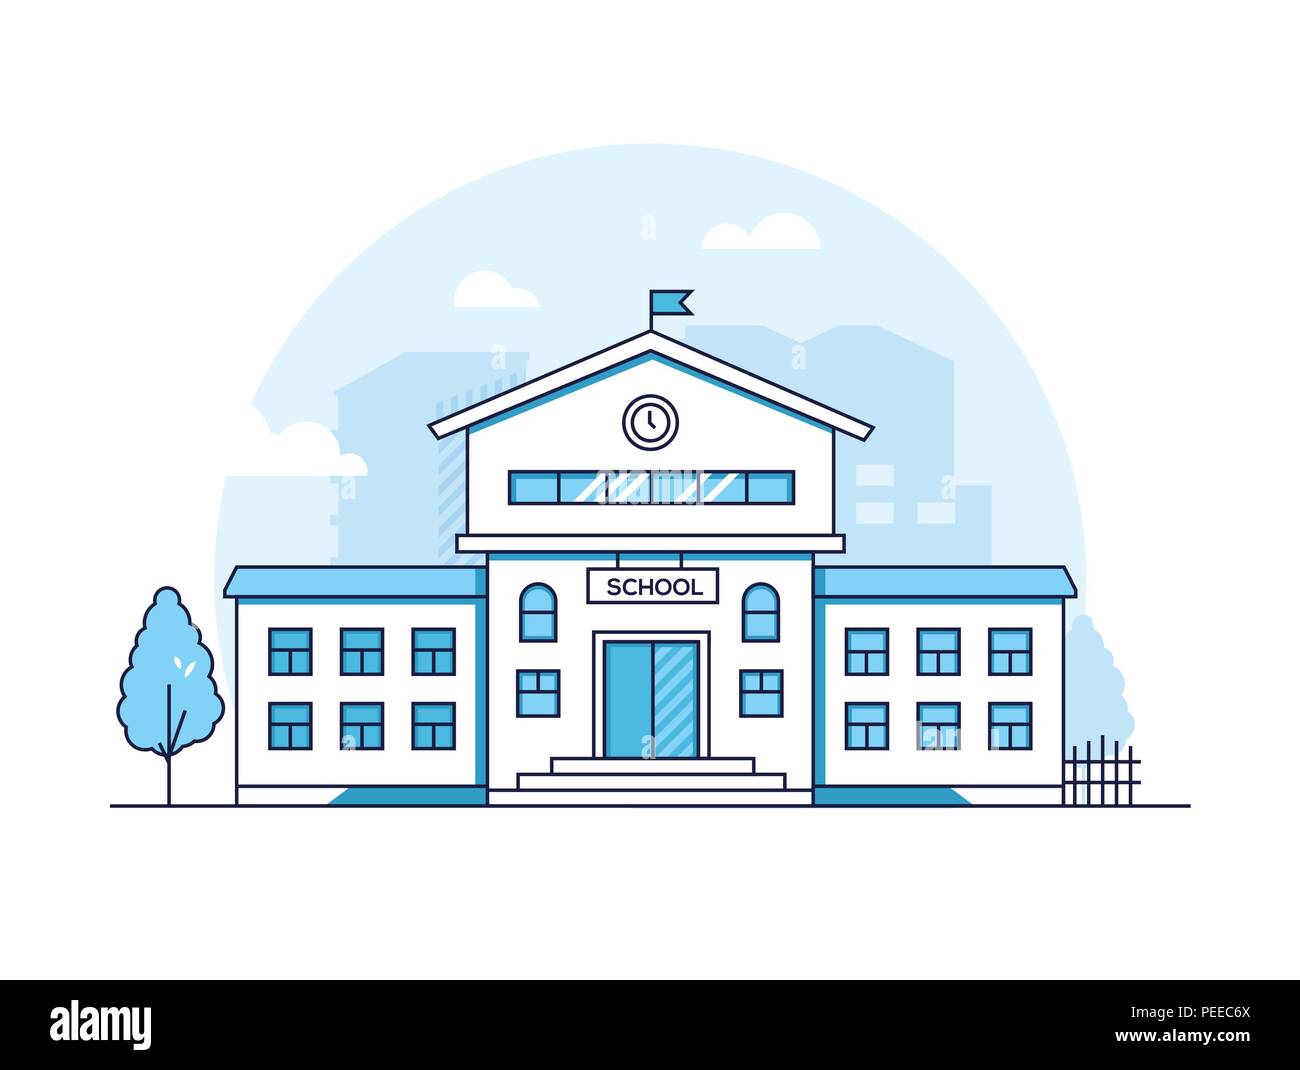 School building - modern thin line design style vector illustration on white background. Blue colored high quality composition with a facade of educat Stock Vector